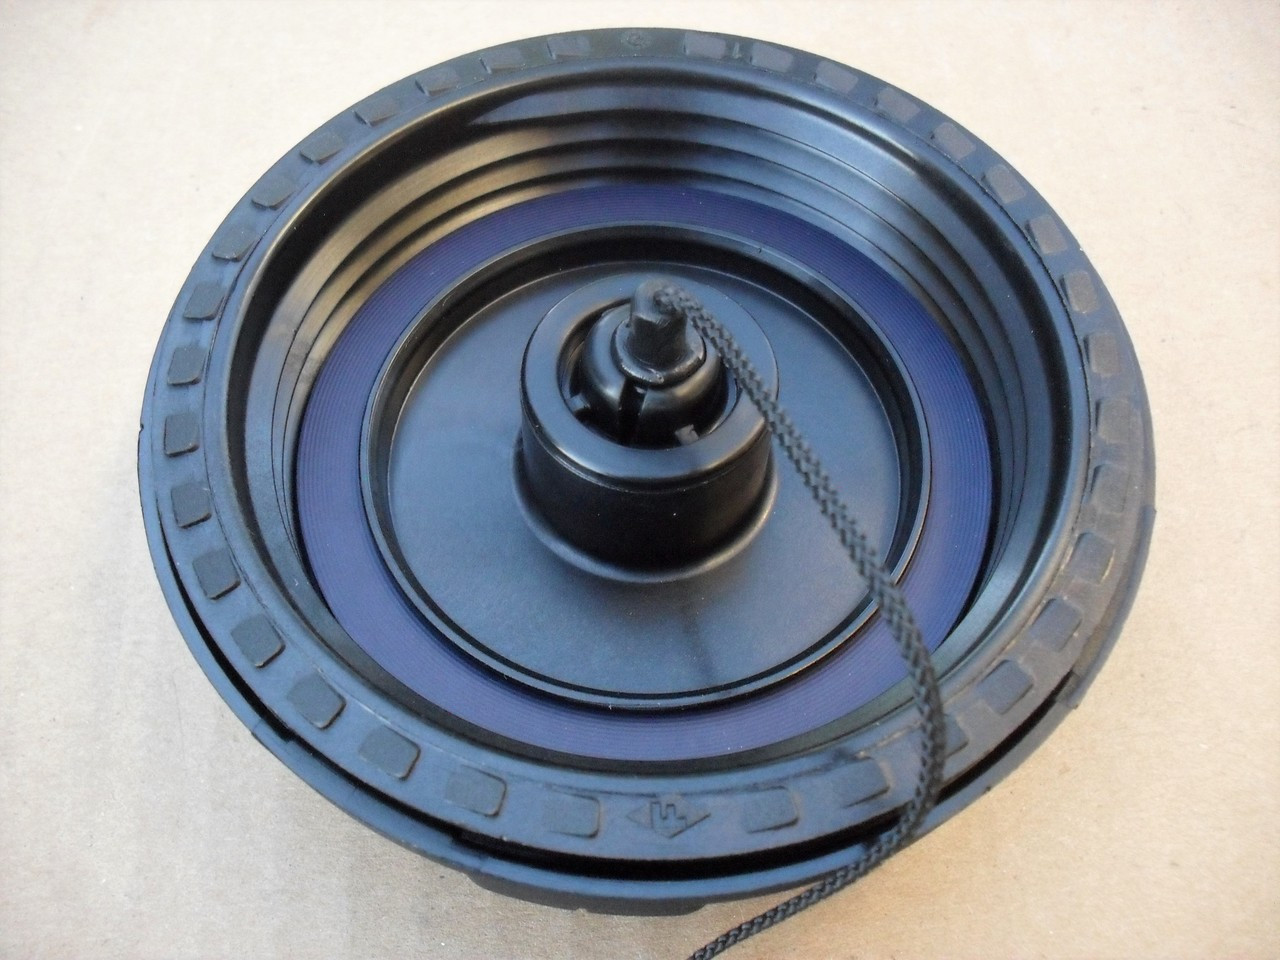 Gas Fuel Cap for Toro Timecutter 1090346, 883980, 109-0346, 88-3980, ID 3-1/4 " Time Cutter, Made In USA